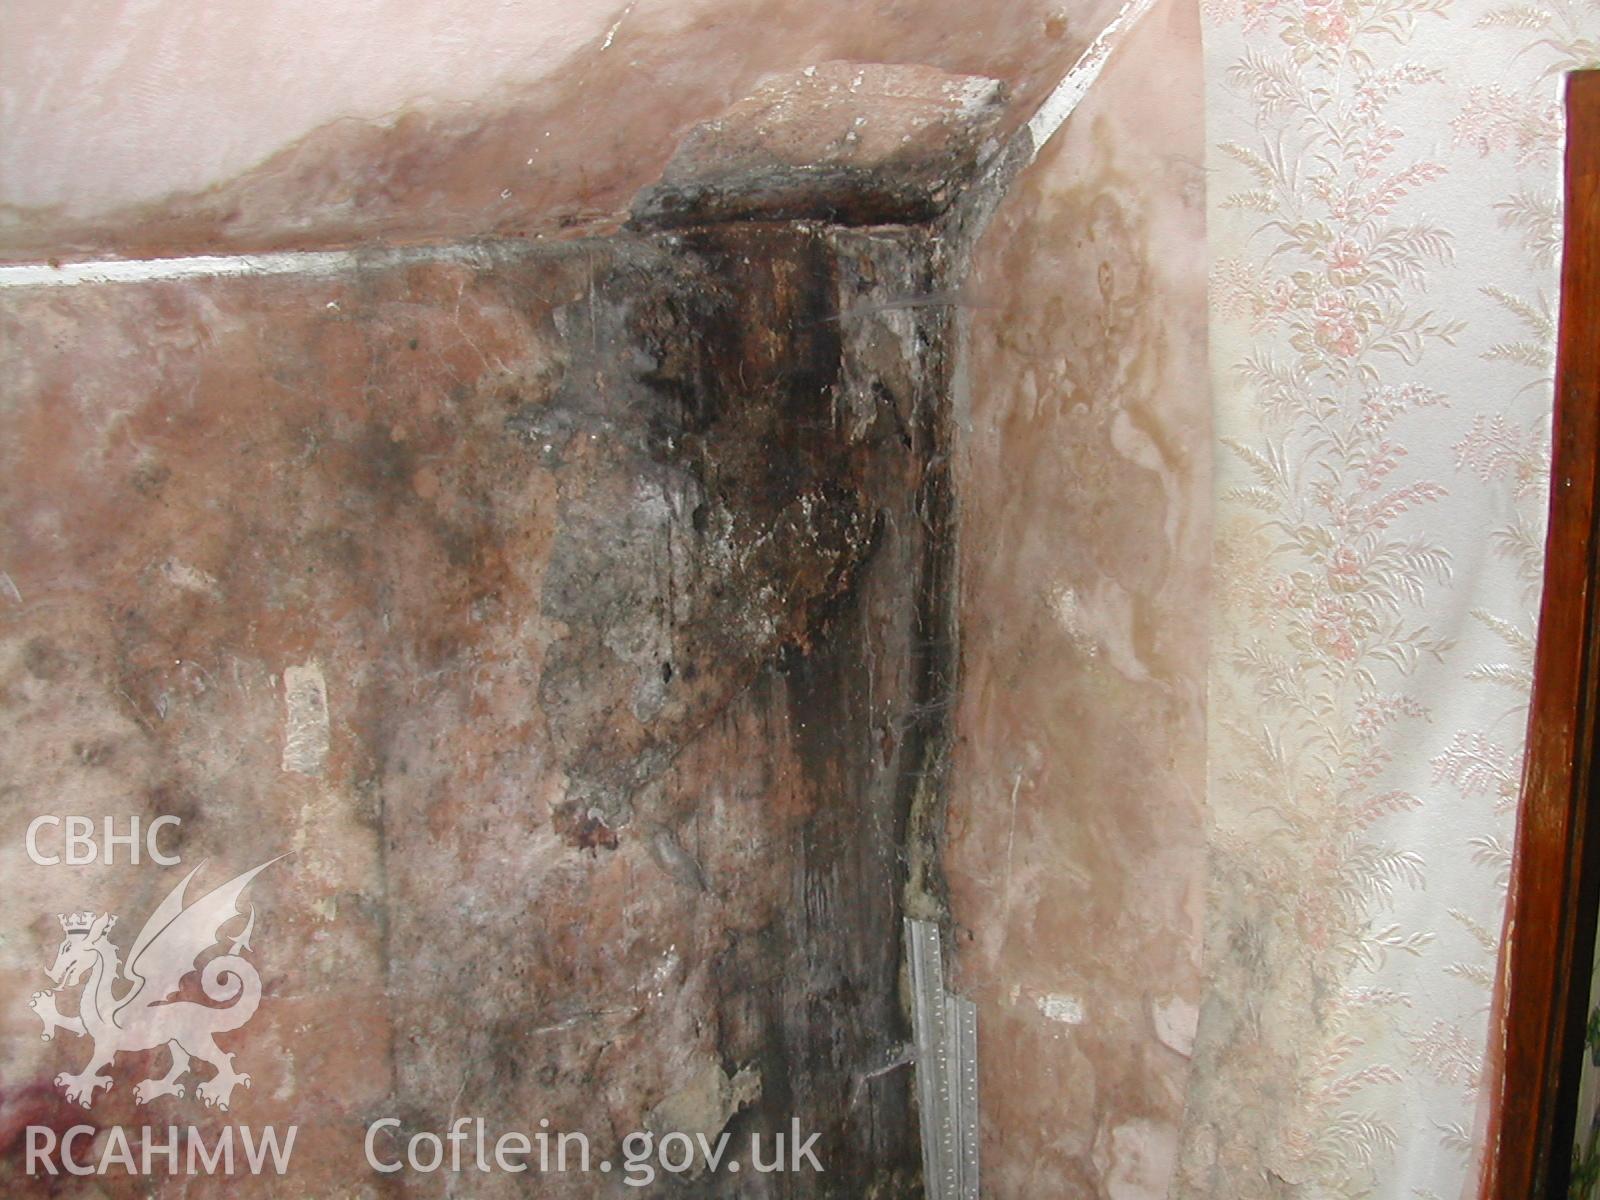 Colour photograph showing detailed interior view of damaged wall in Rosacre, Gronant, Prestatyn. Unknown date. Donated by the Conservation Department of Flintshire County Council, in advance of relocation to new offices.